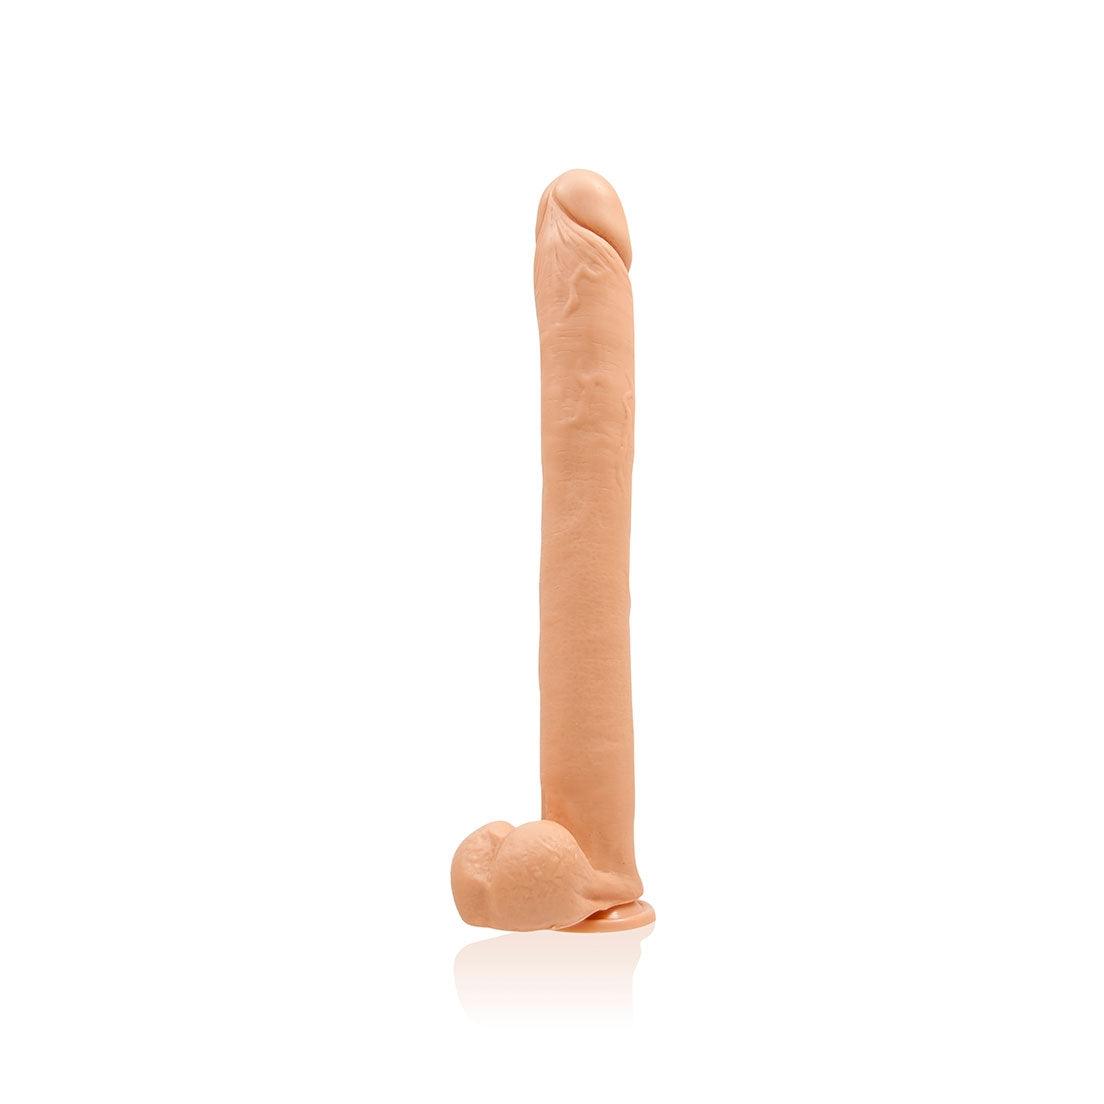 16 Inch Exxxtreme Dong W/suction - Flesh -